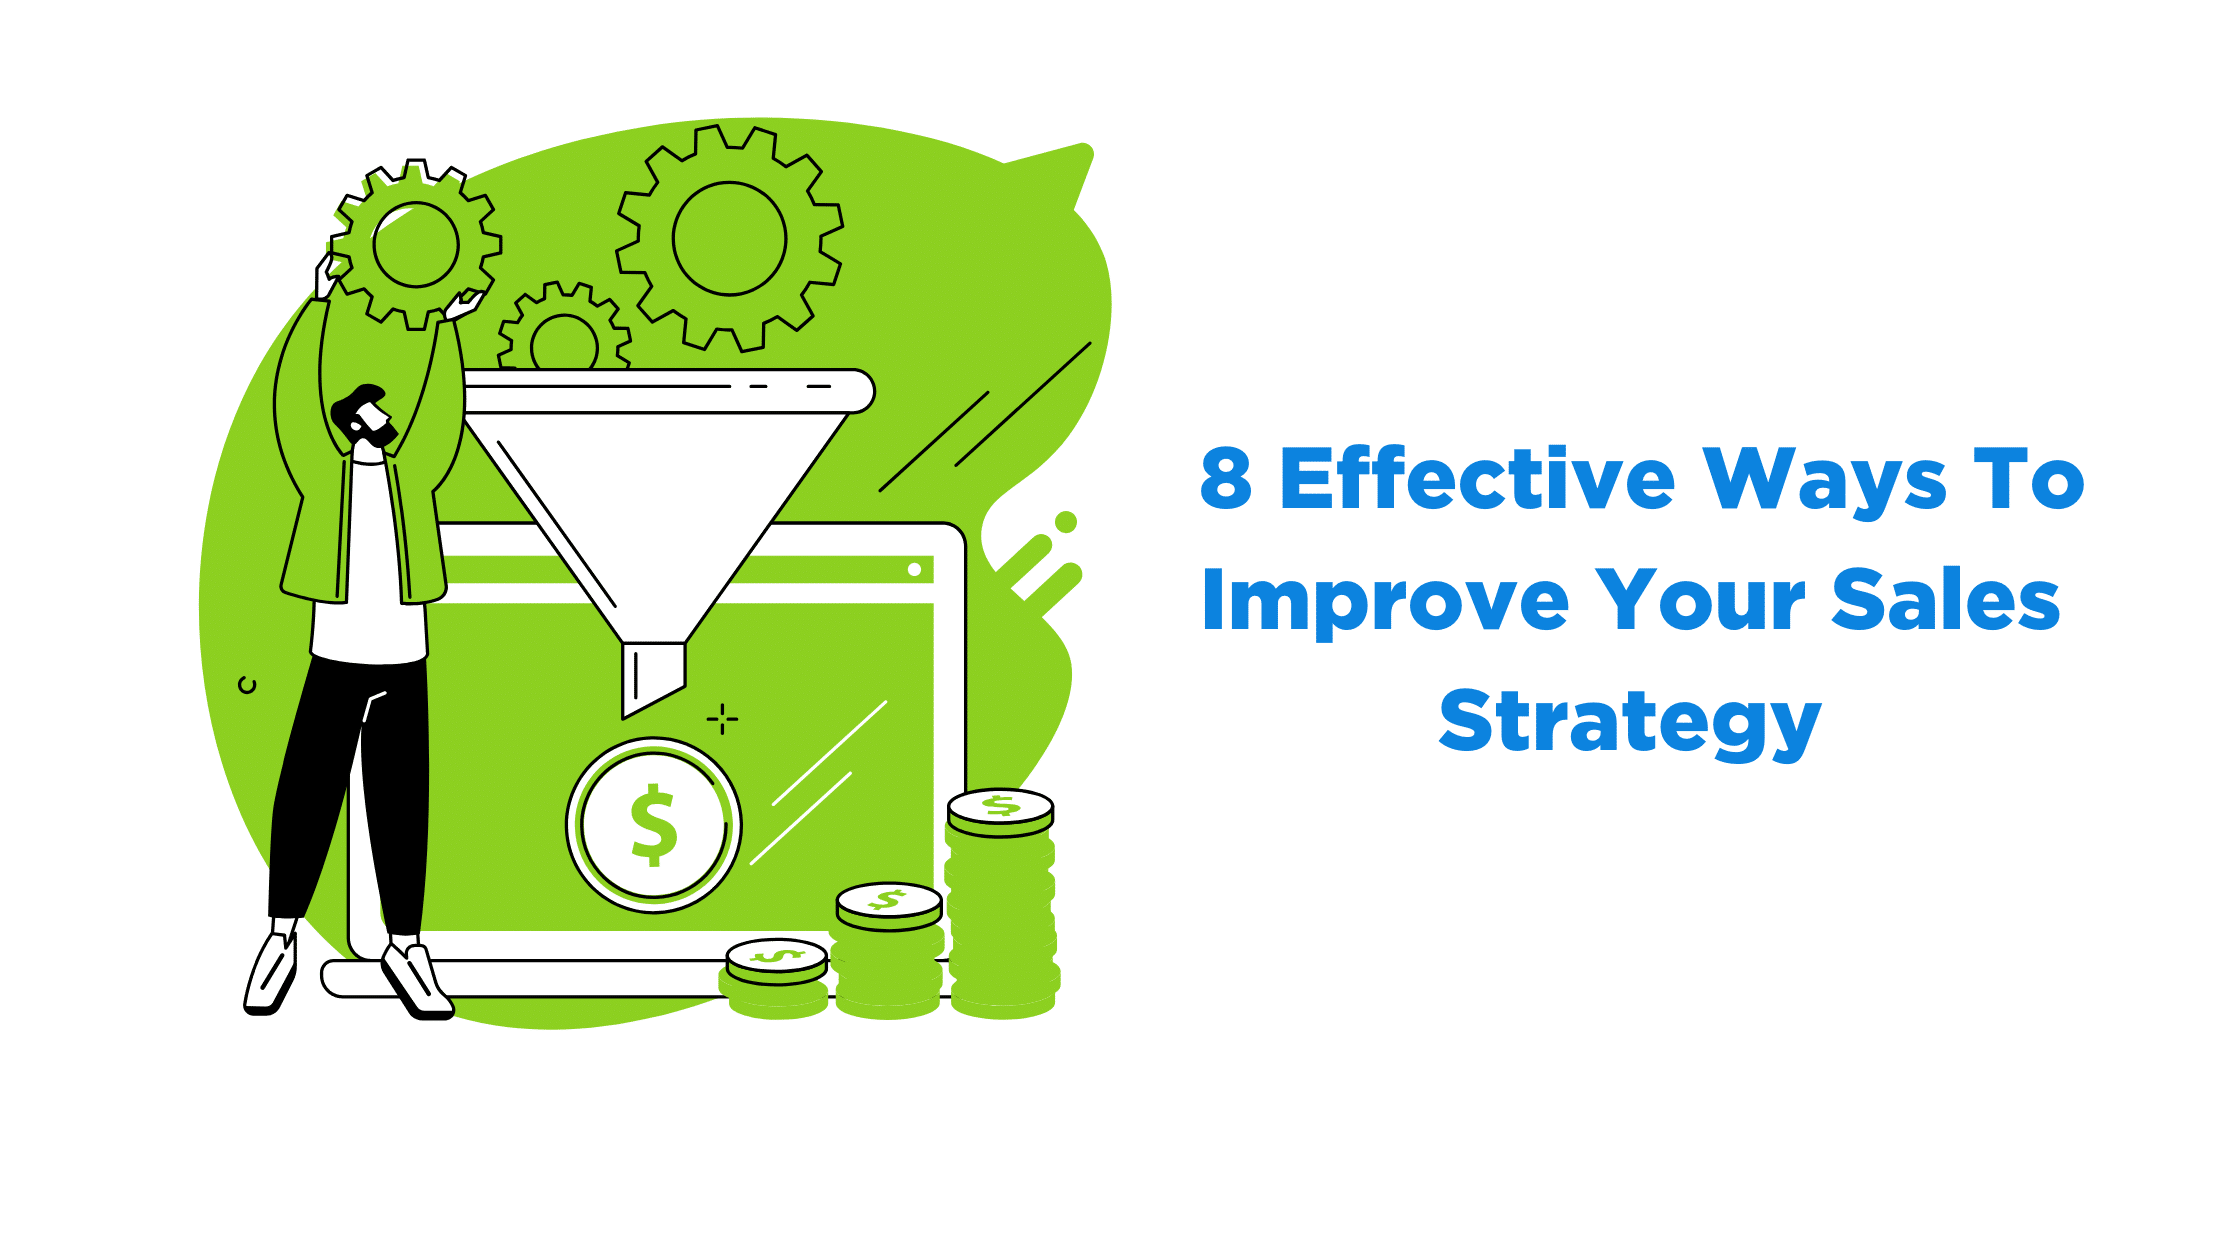 8 Effective Ways To Improve Your Sales Strategy